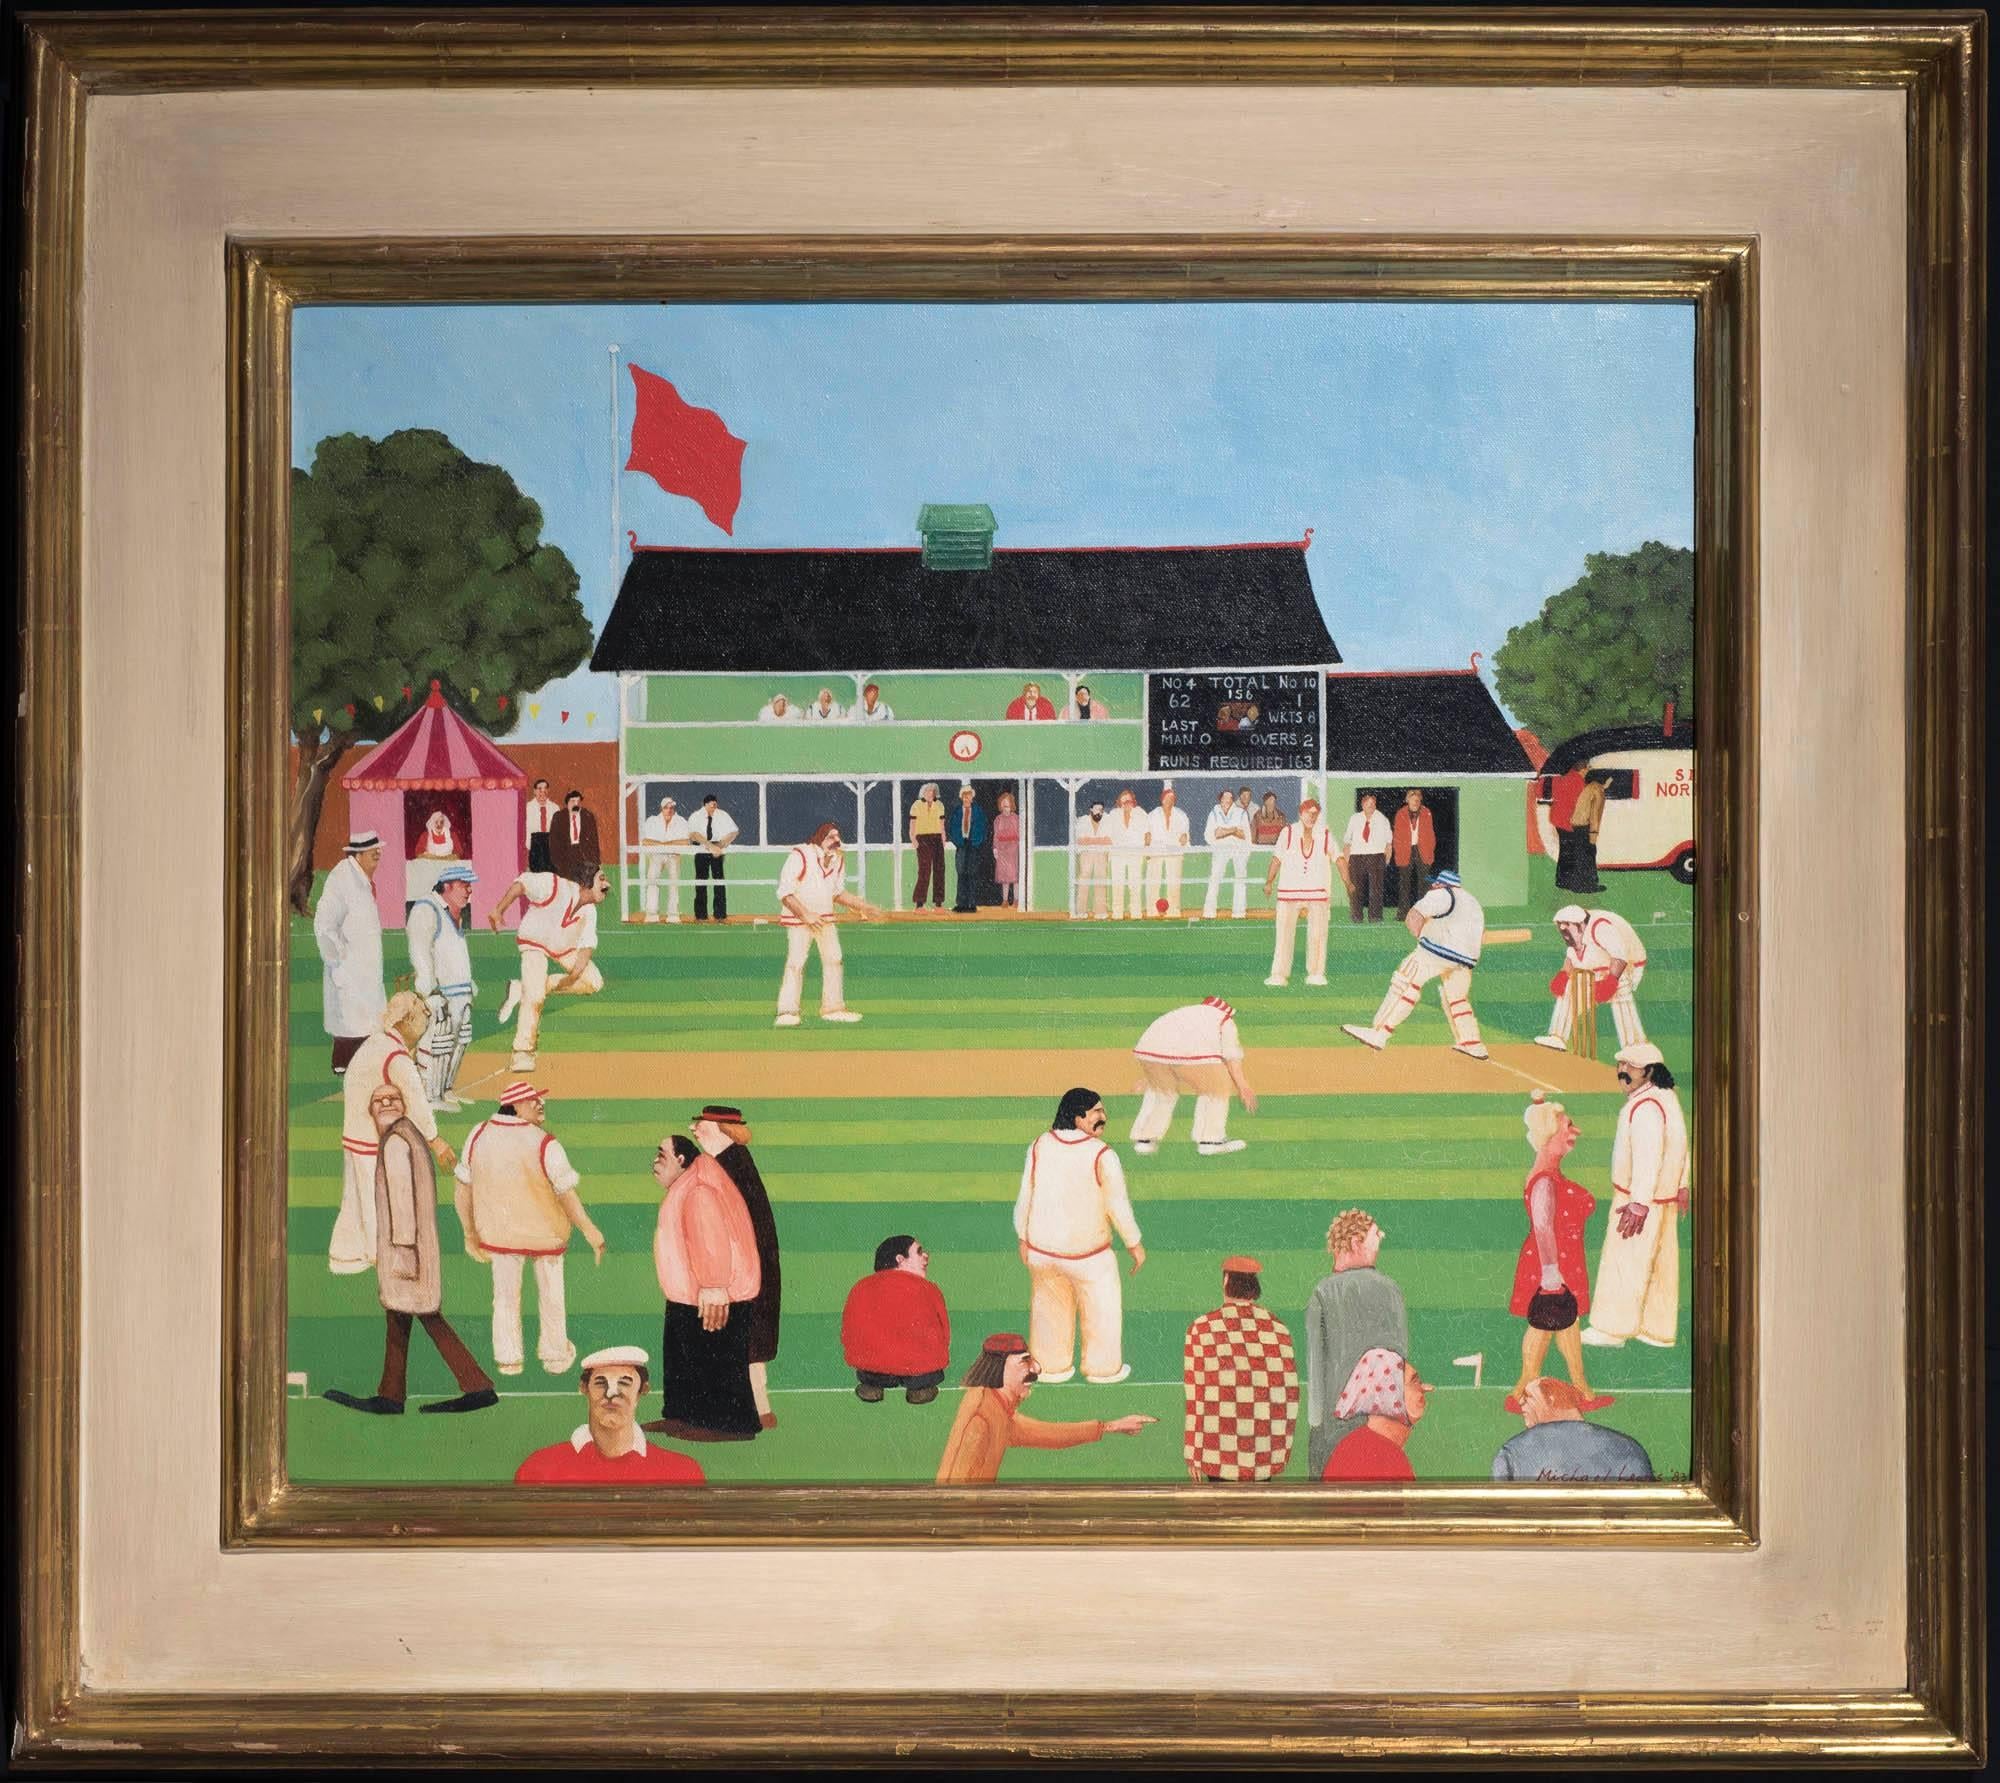 Cricketers Catch It - Painting by Michael Lewis